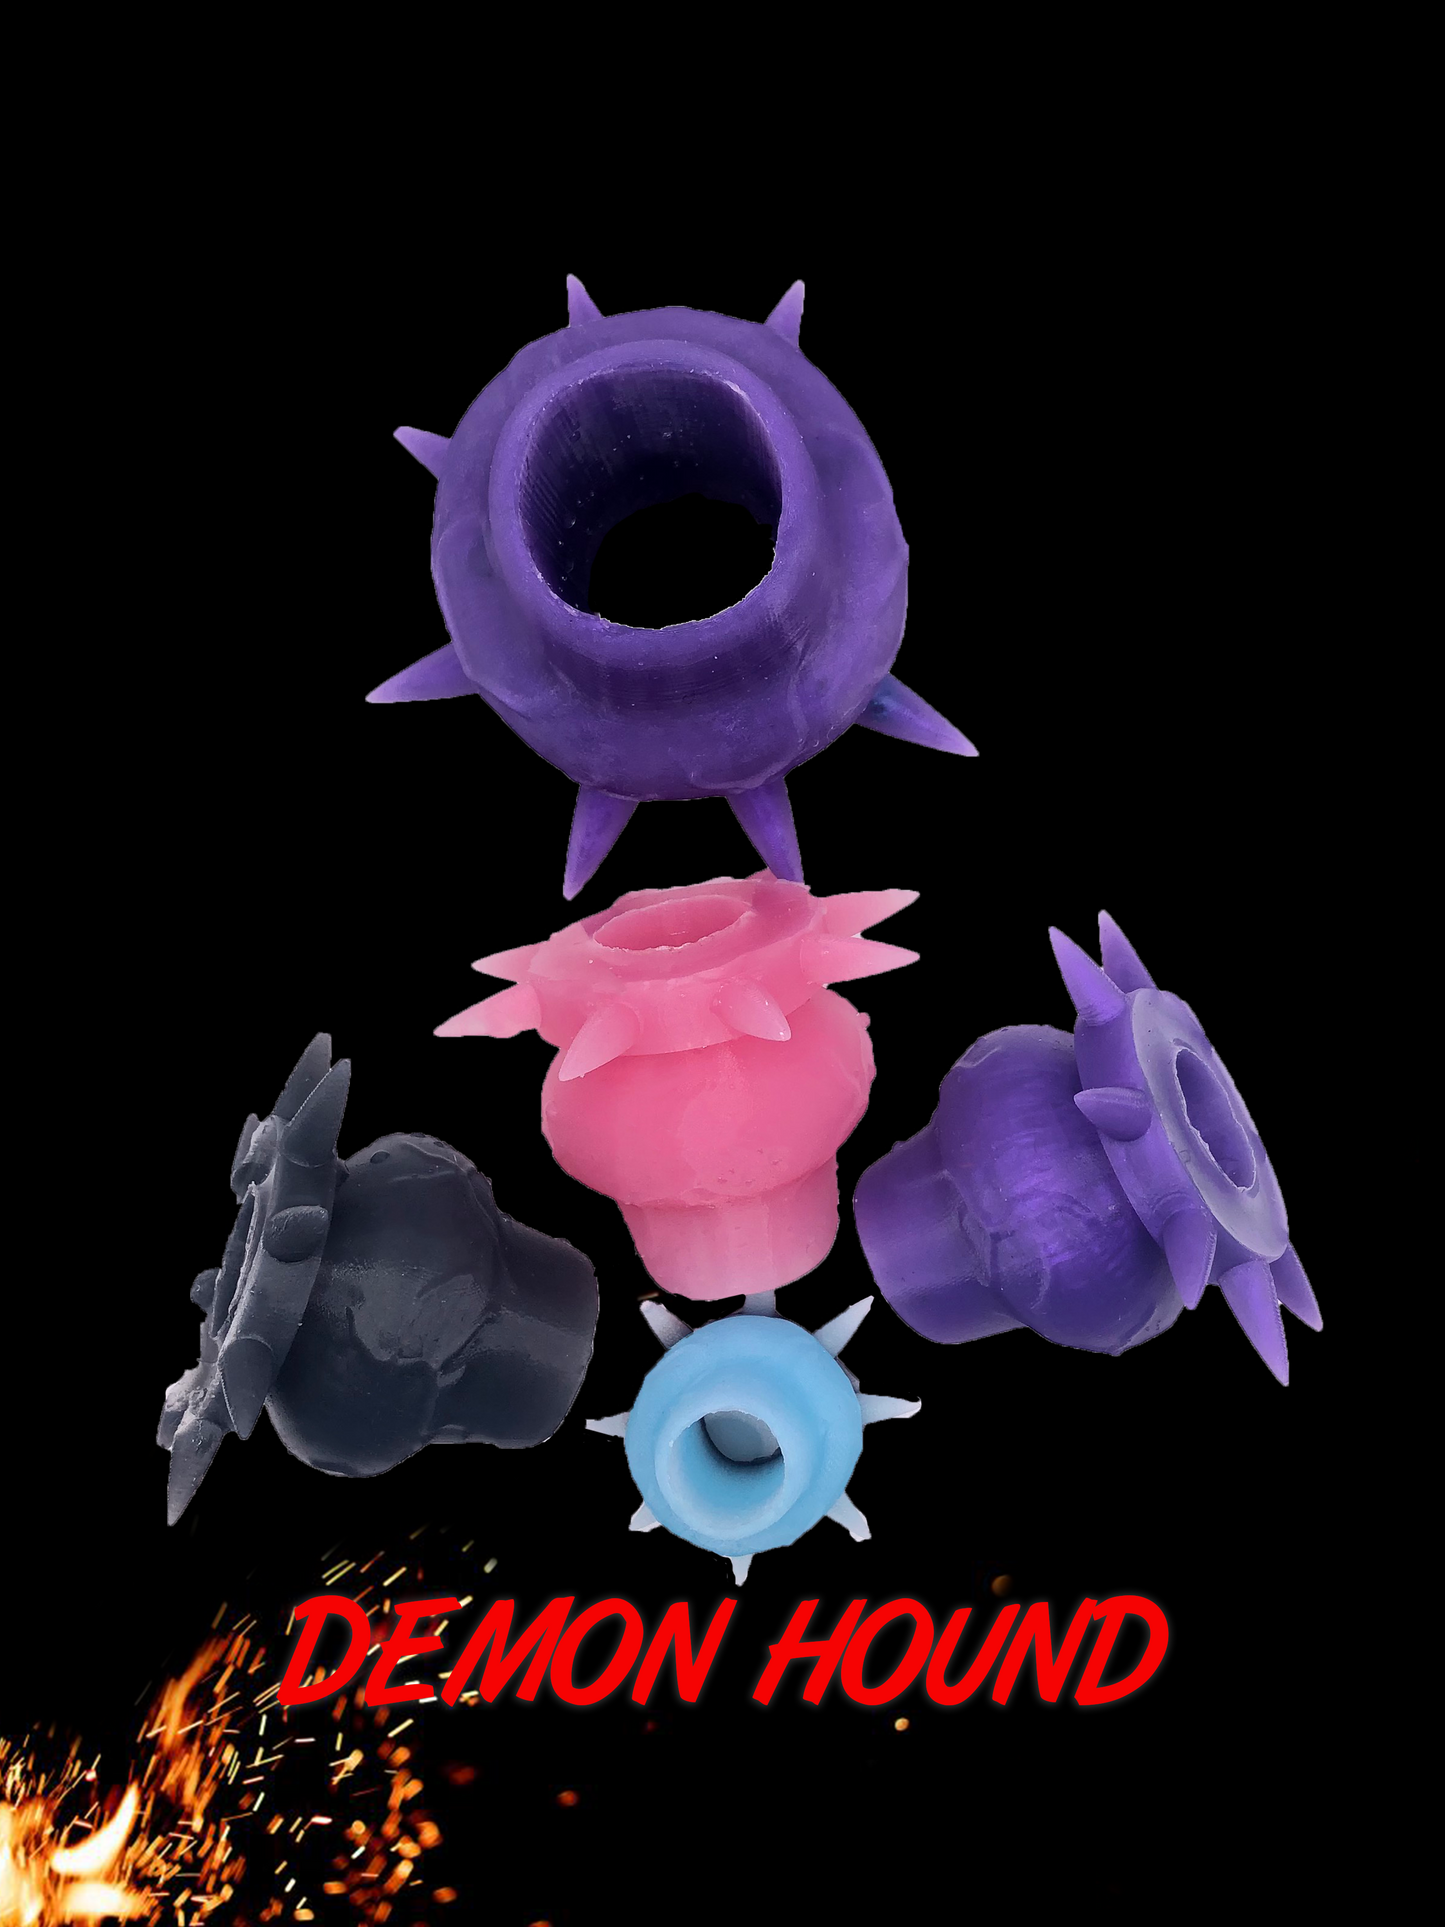 DEMON Hound KNOT Now with Sizes, Ring and Dildo Knots-Sex toy Couples toys-/Dildo Enhancer- FTM ring